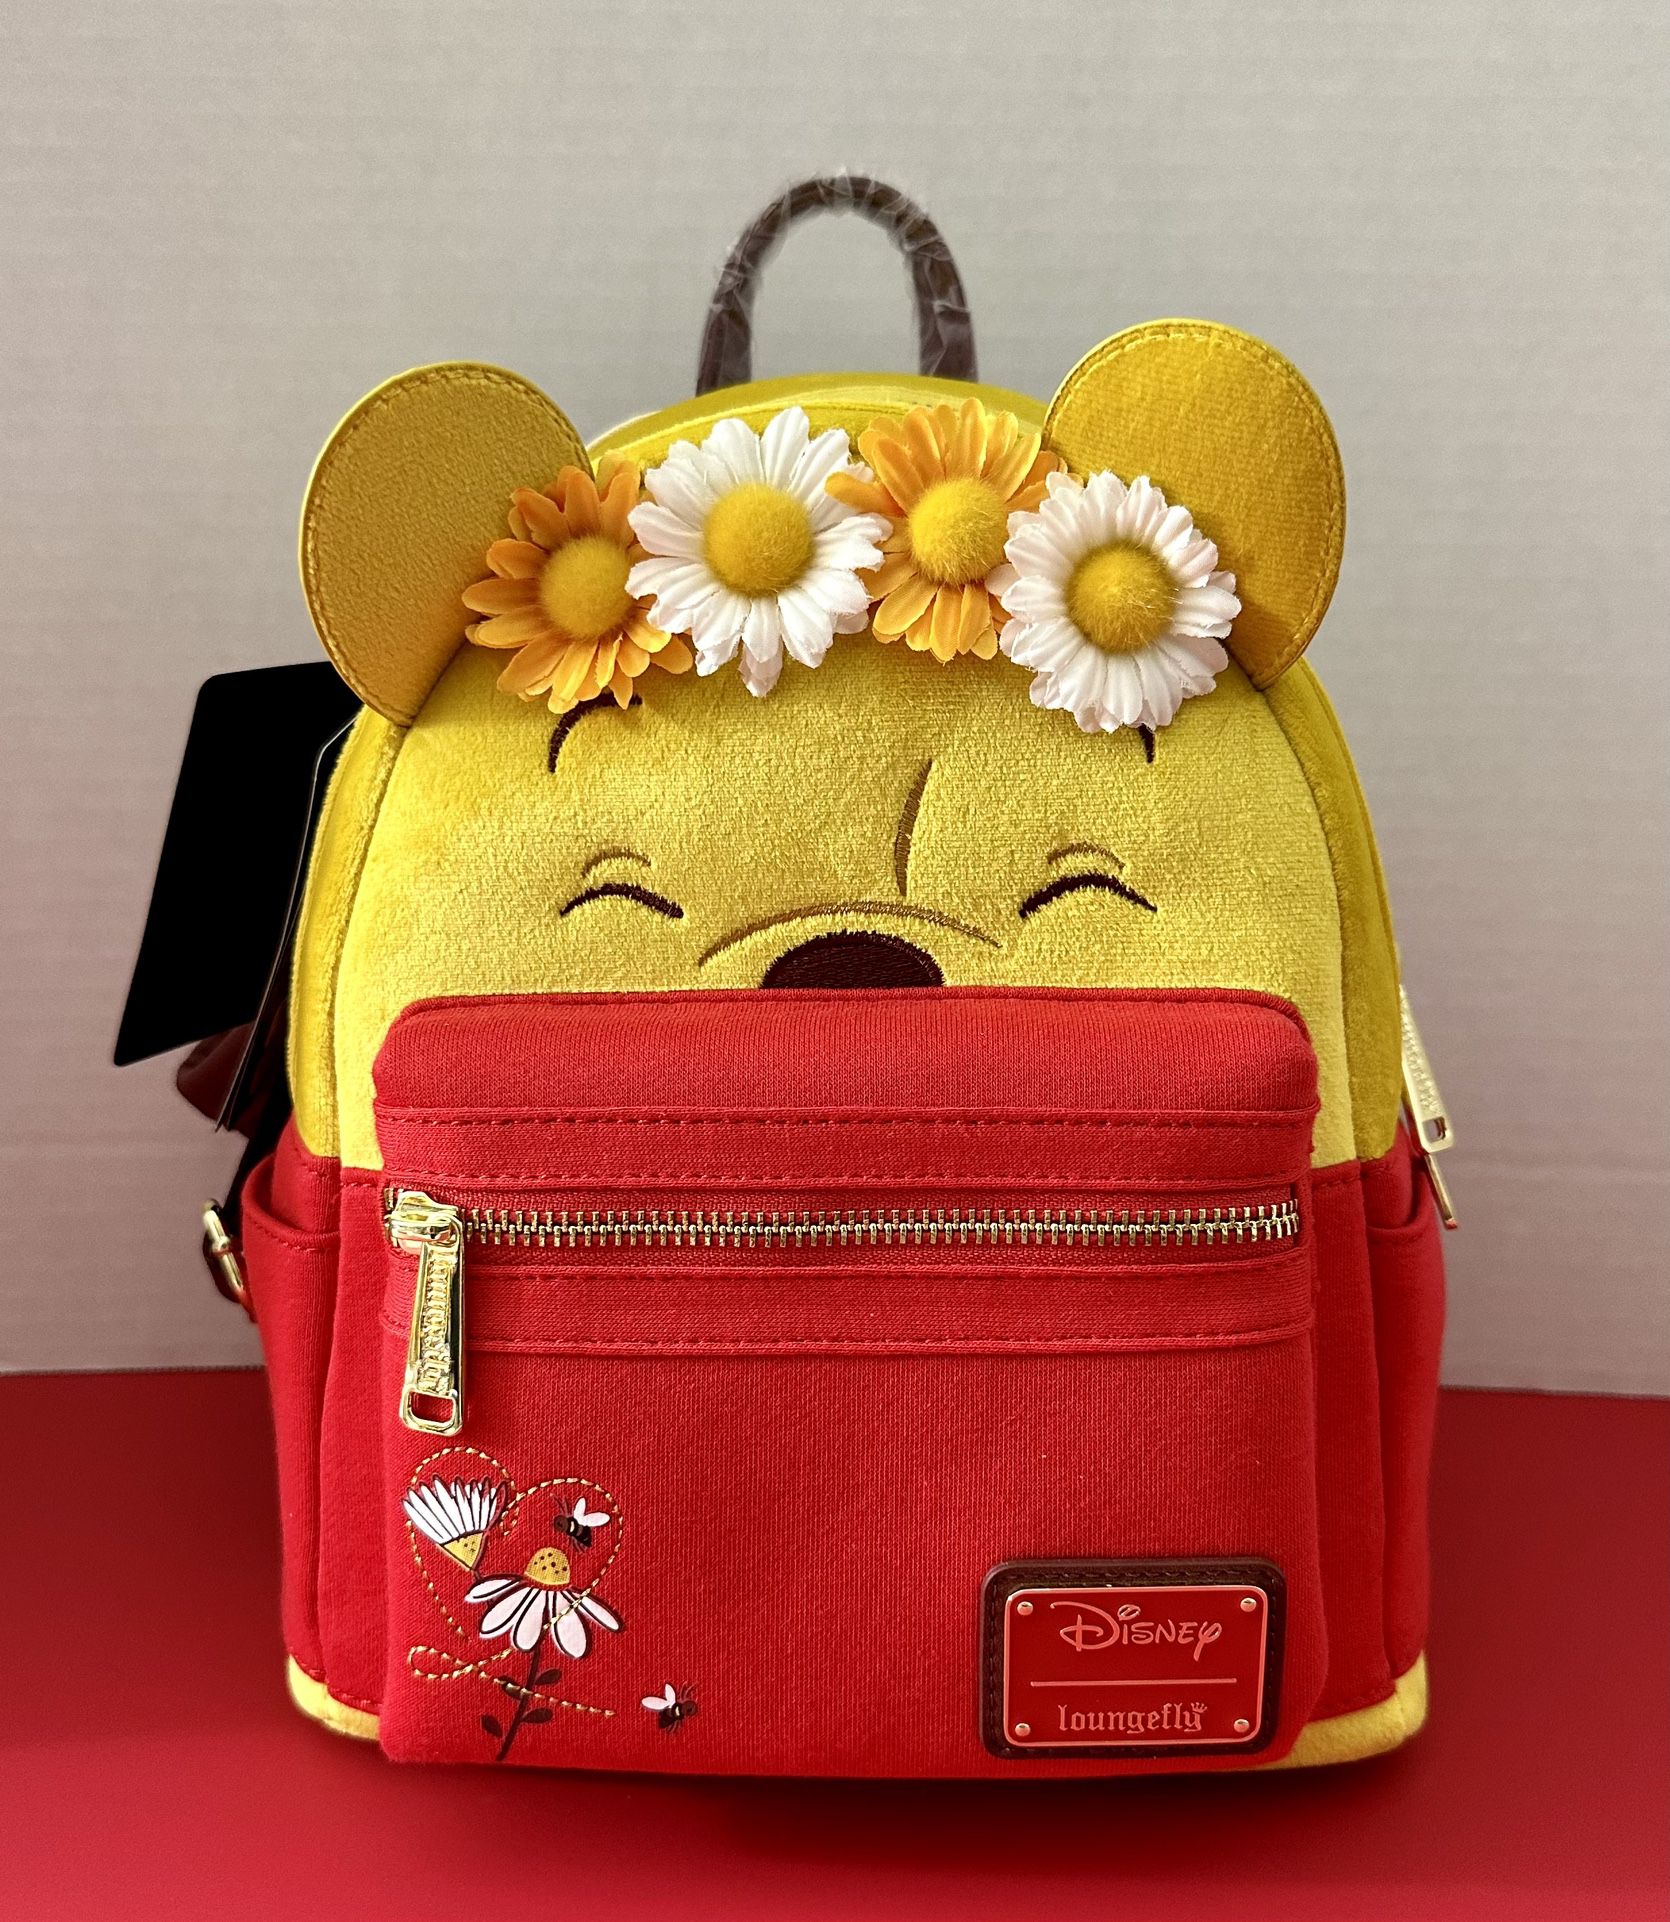 BRAND NEW WITH TAGS! DISNEY WINNIE THE POOH BEAR FLORAL CROWN FLOCKED LOUNGEFLY BACKPACK FOR SALE. 